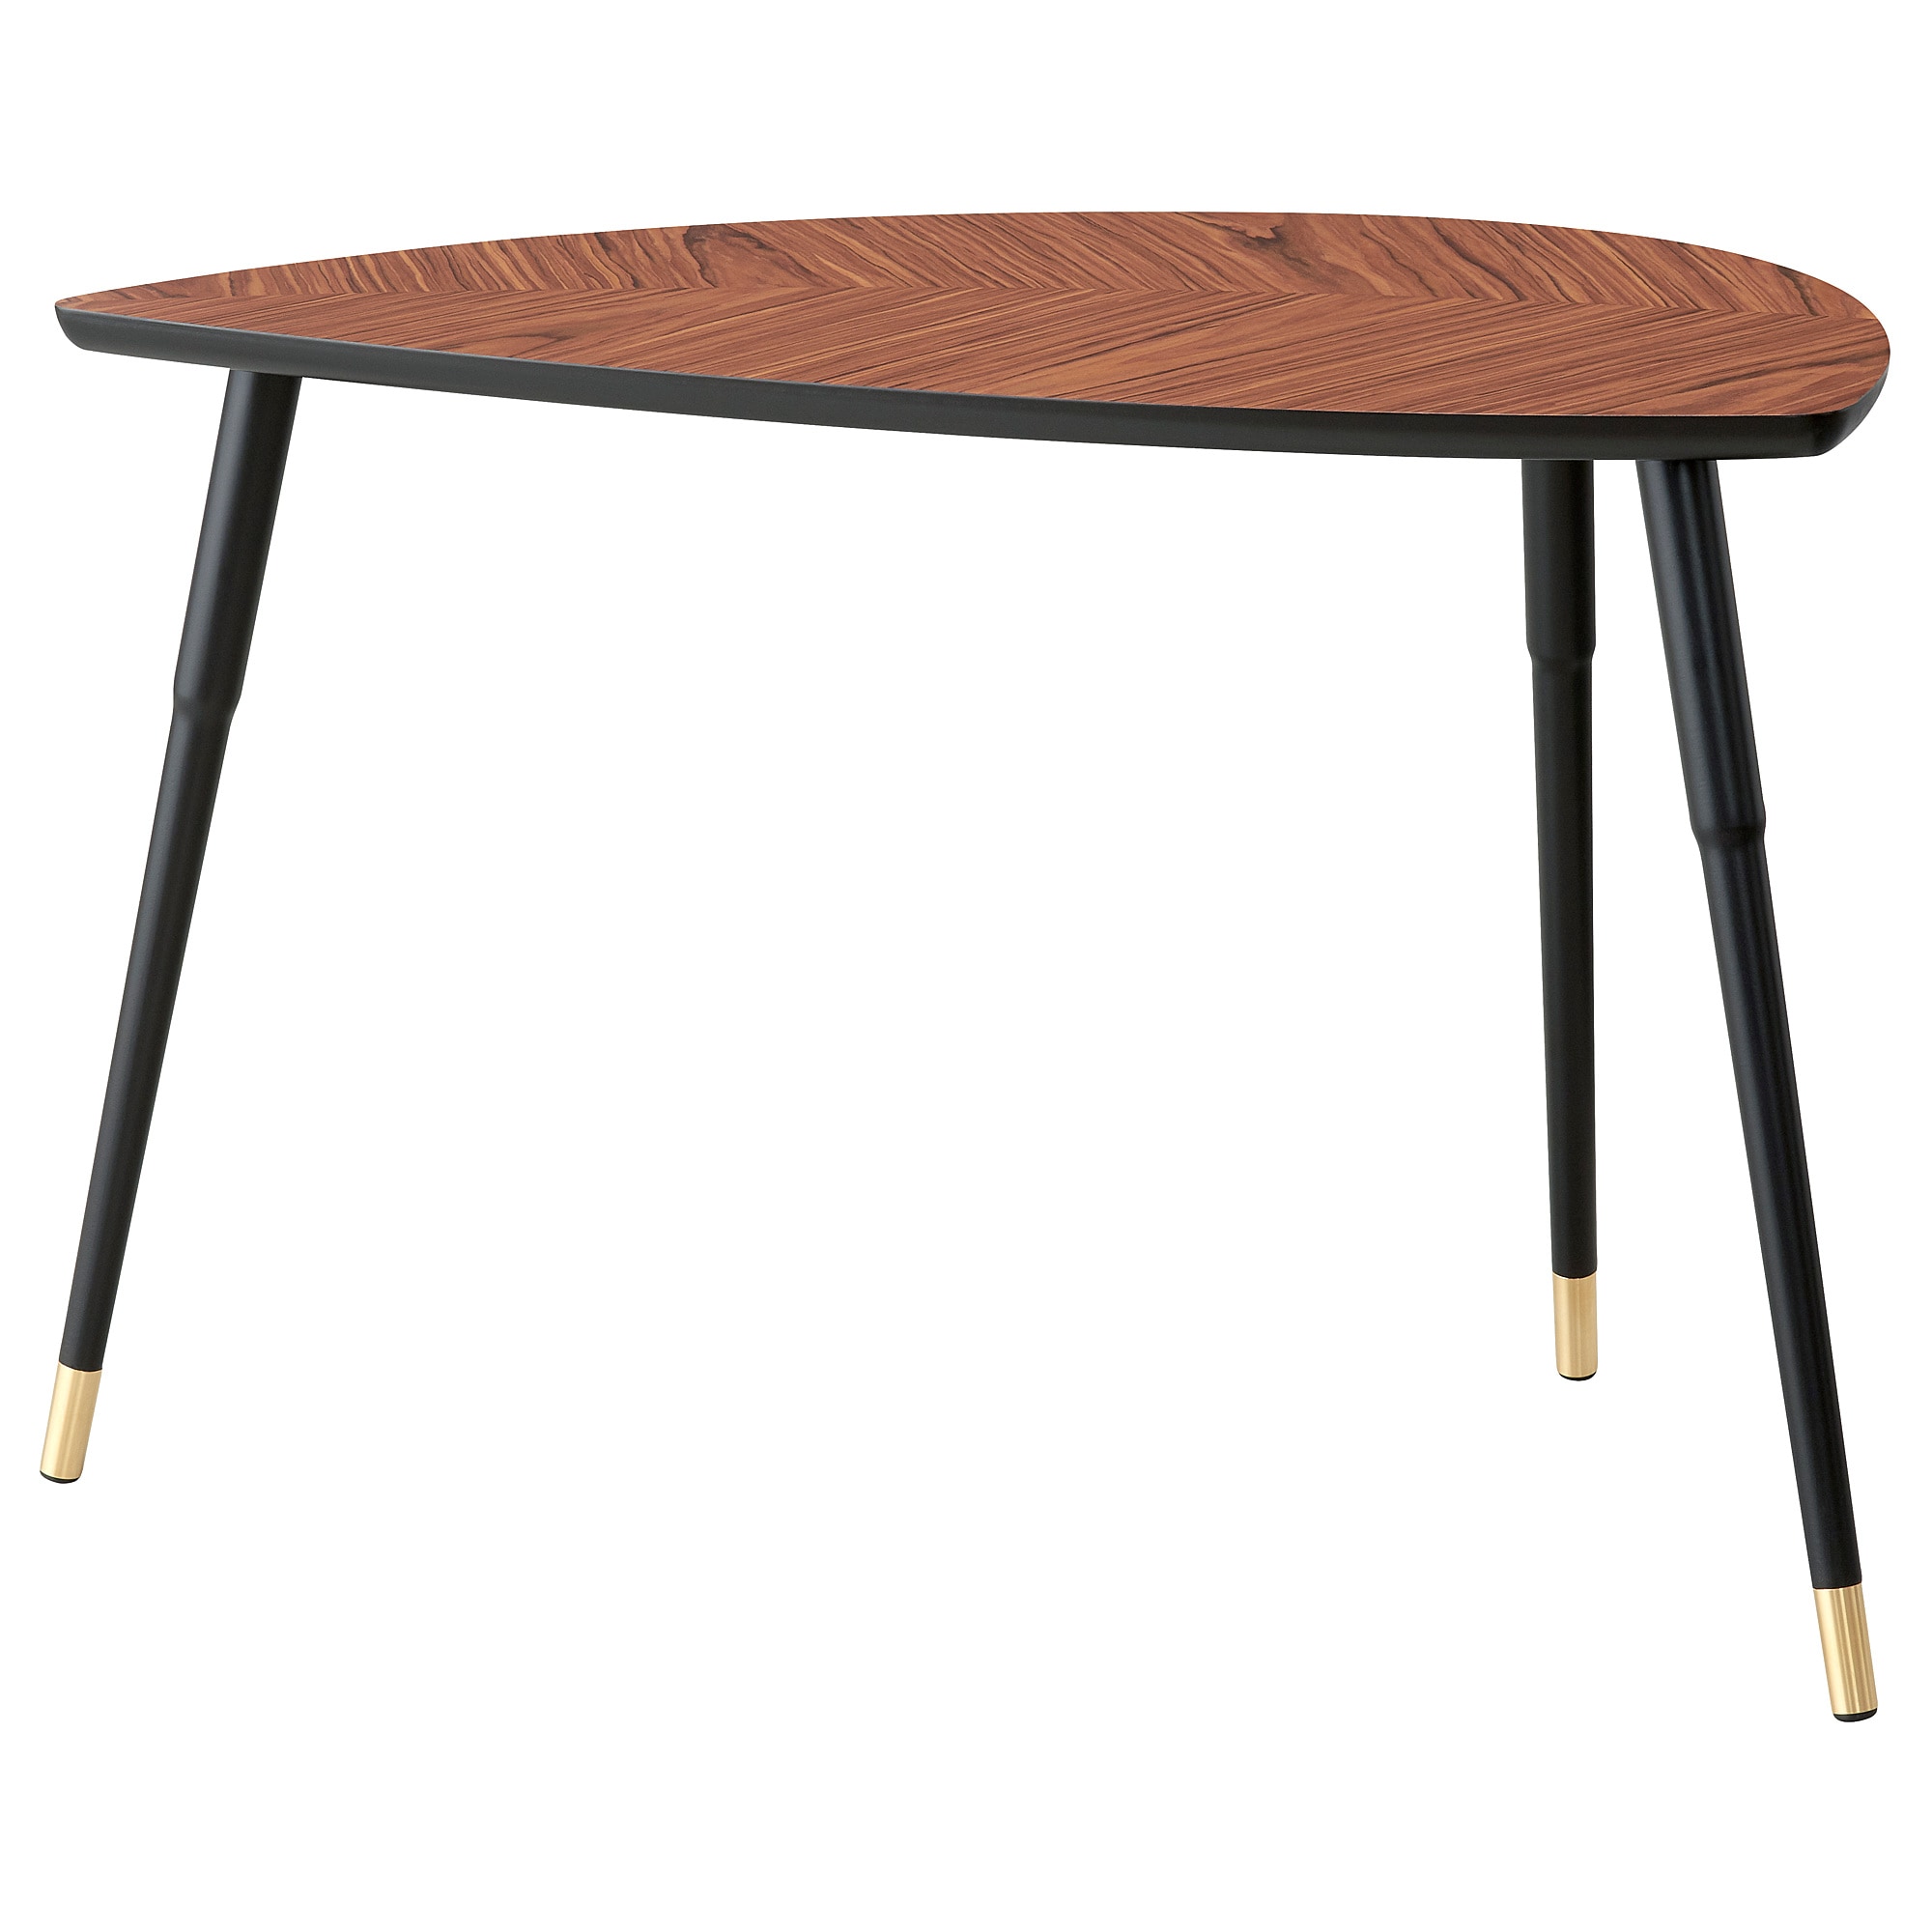 occasional tables tray storage window ikea lovbacken side table medium brown dark blue accent the veneered surface durable stain resistant and easy keep plastic umbrella